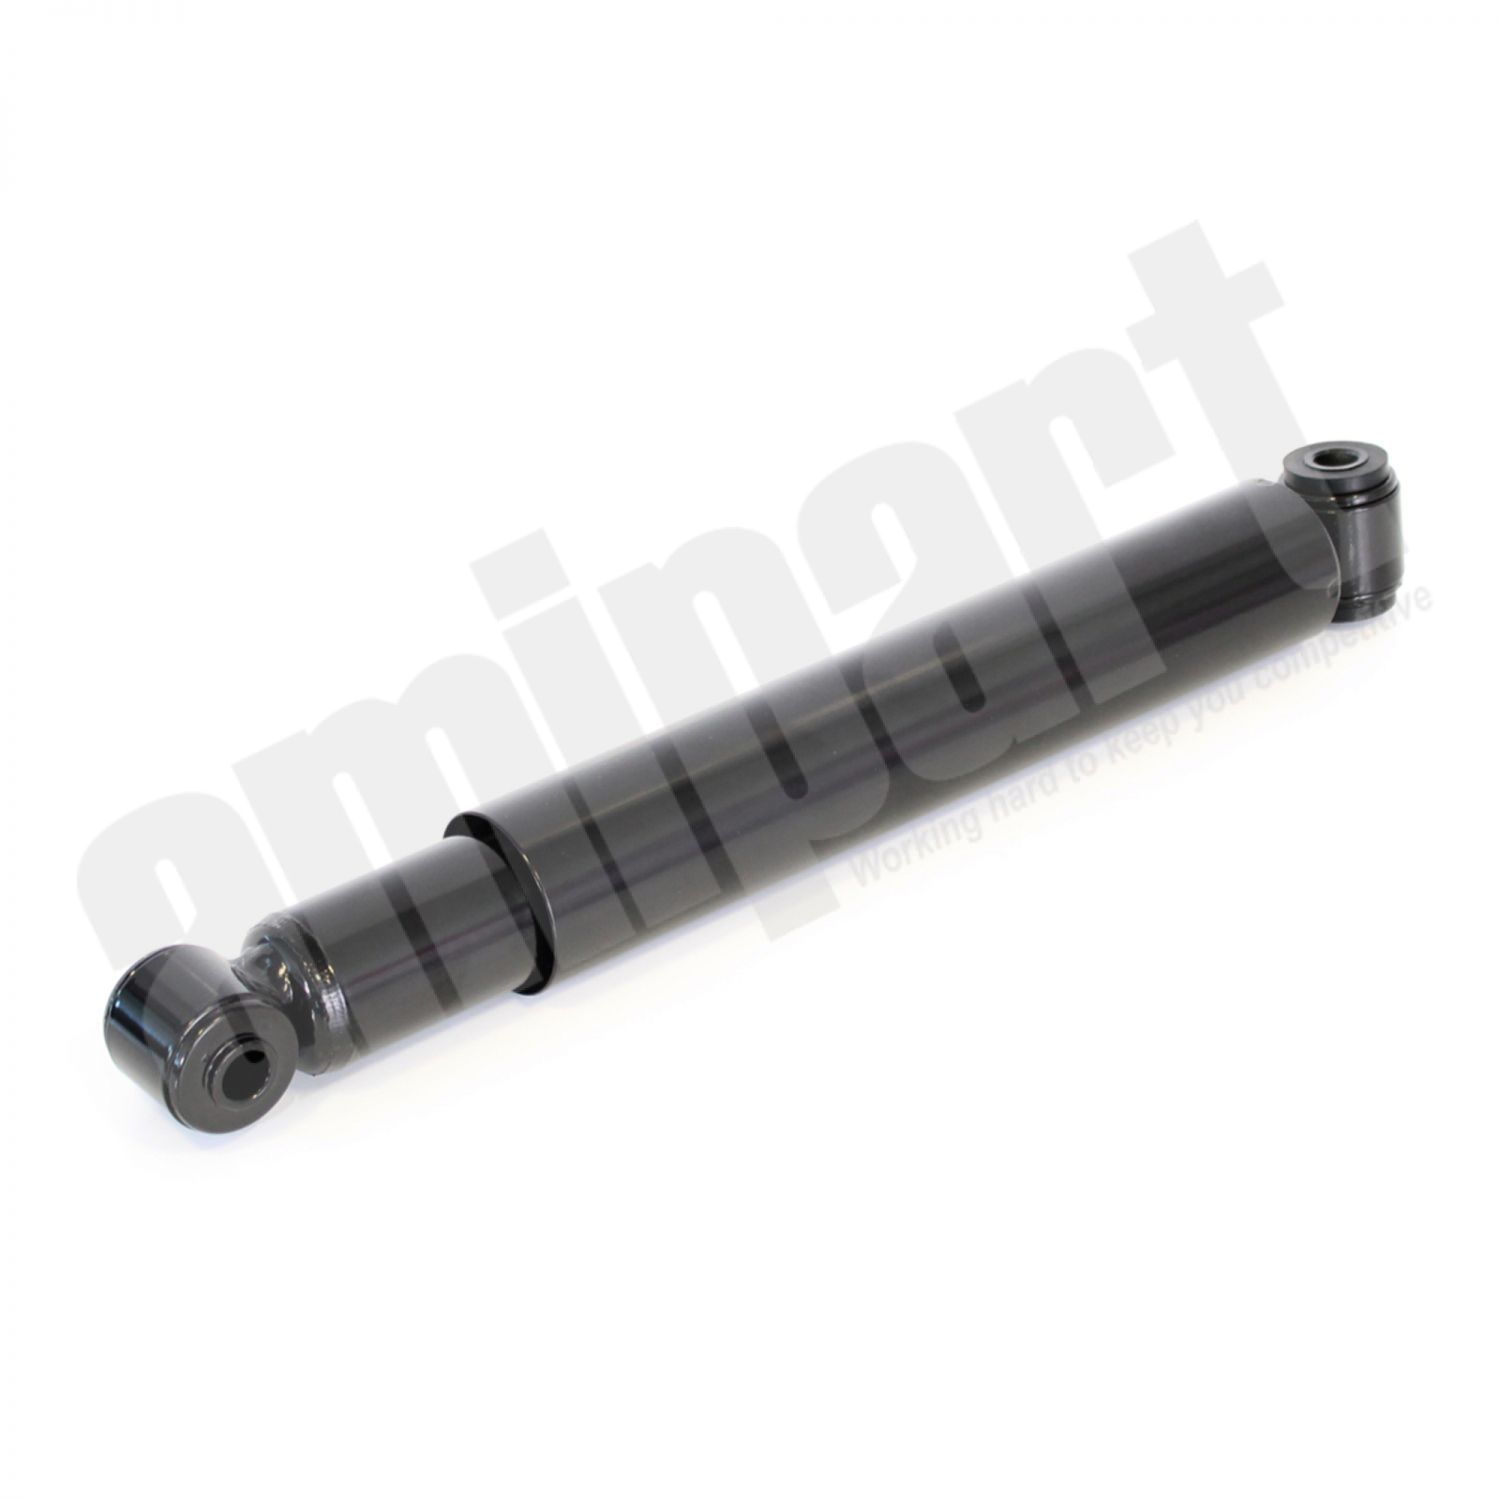 Amipart - BPW/SAF AXLE TRAILER SHOCK ABSORBER